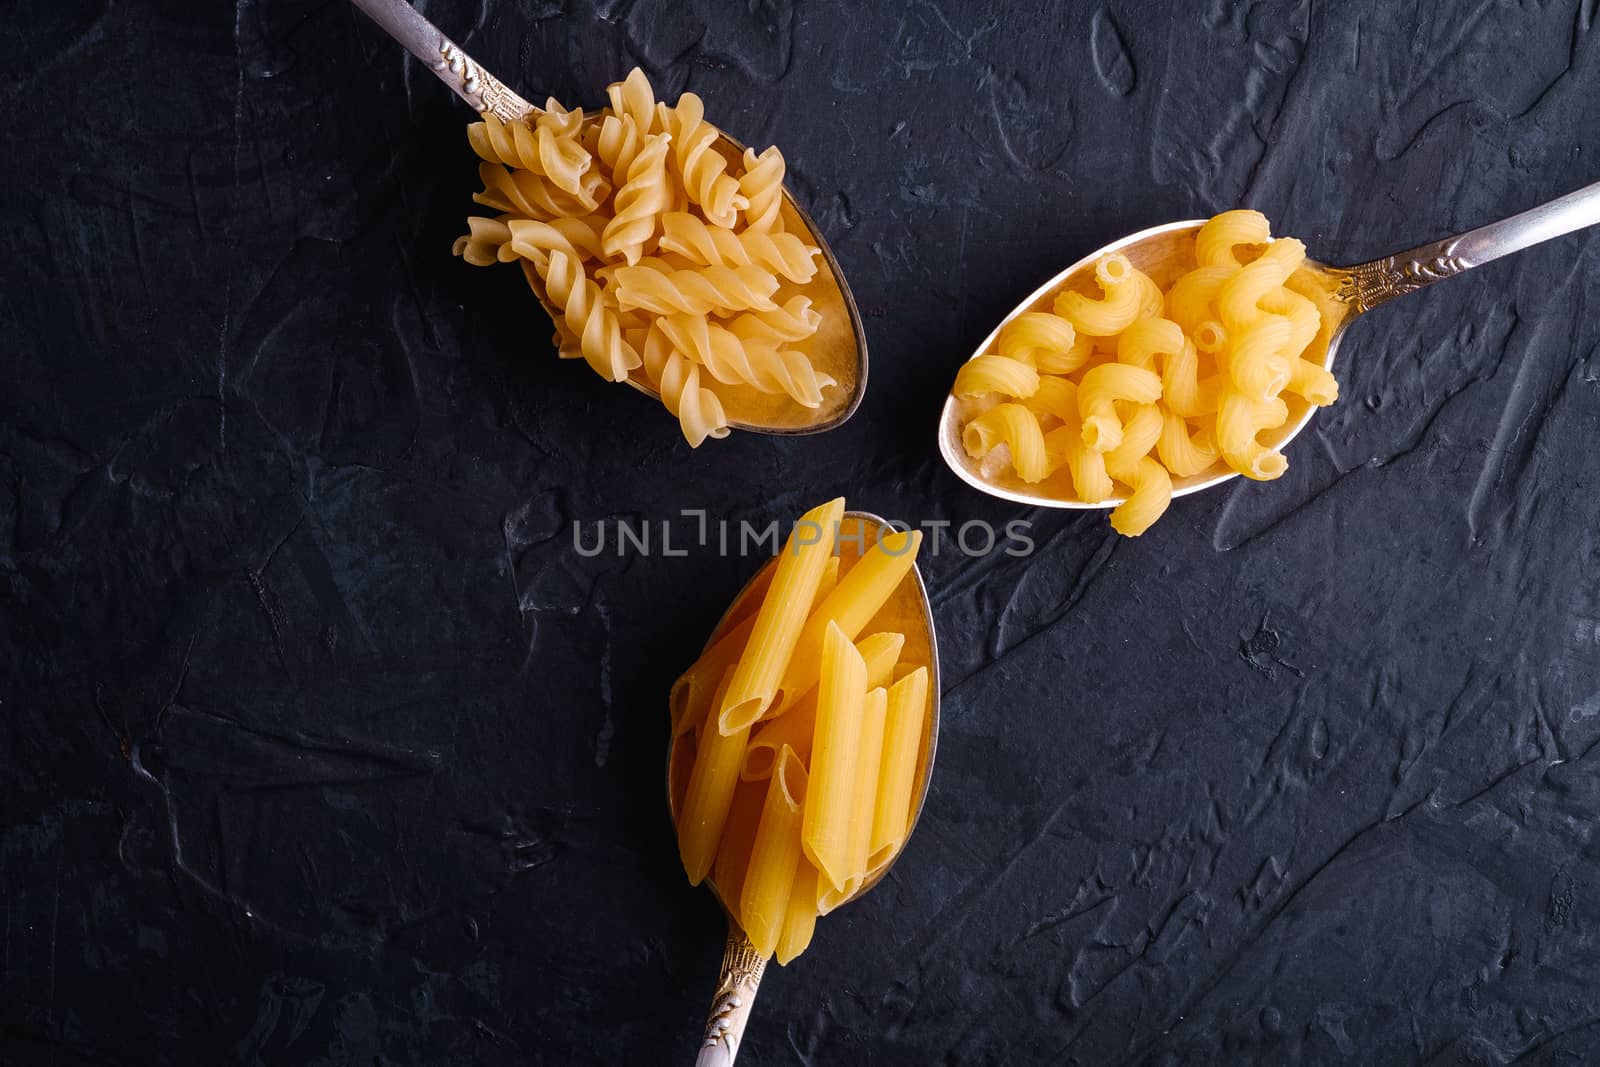 Three cutlery spoons with variety of uncooked golden wheat pasta on dark black textured background, top view